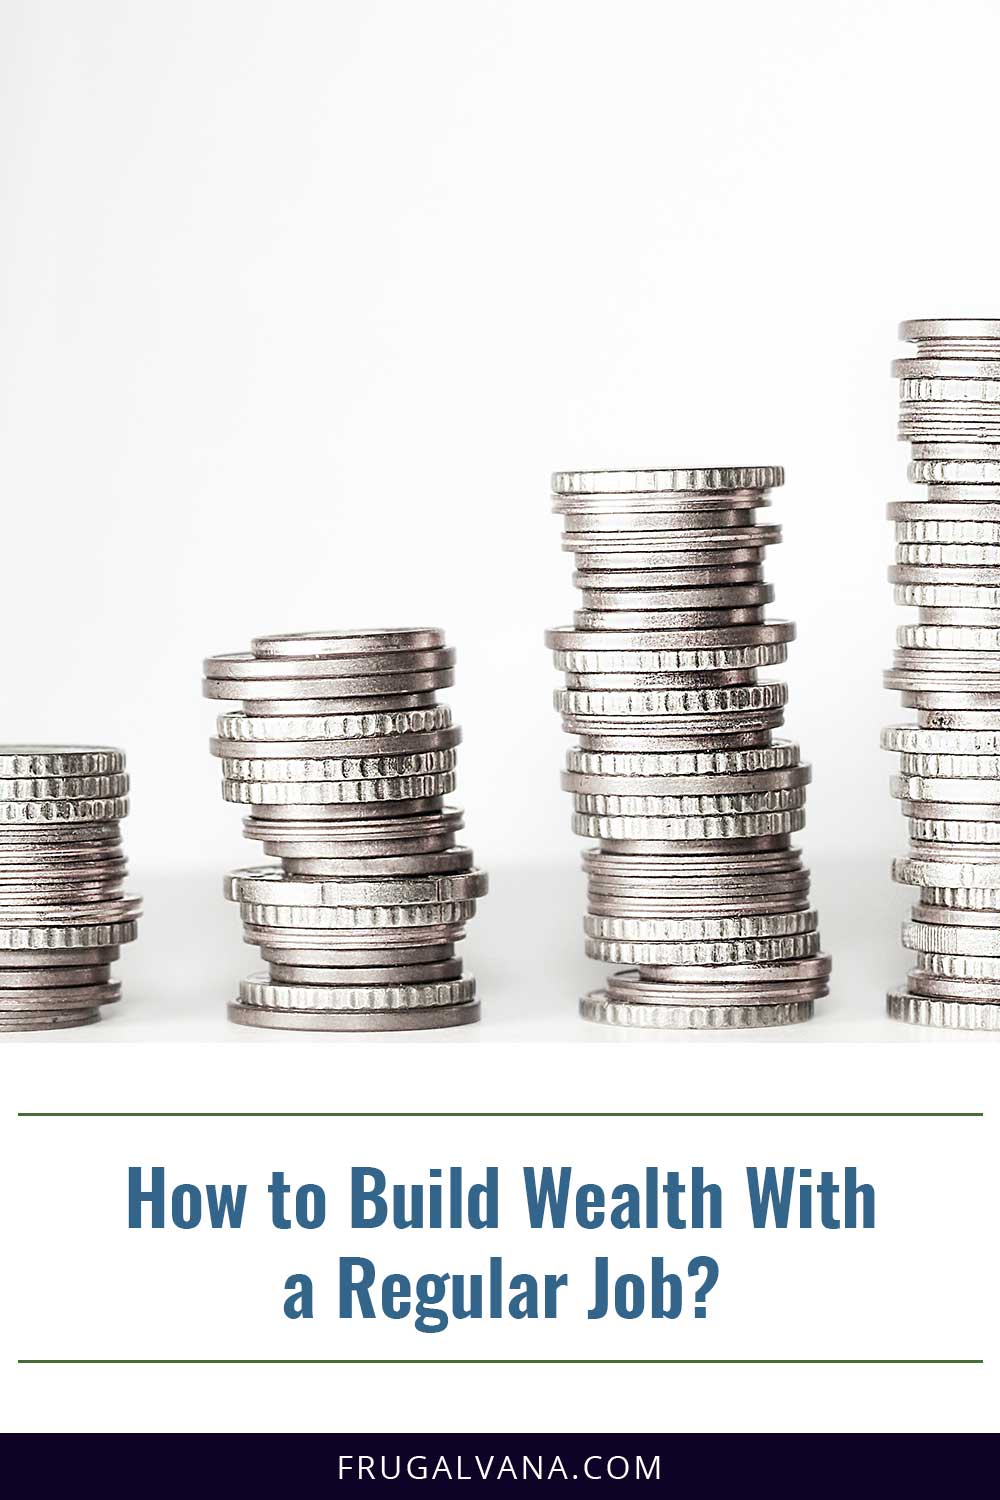 How to Build Wealth With a Regular Job?